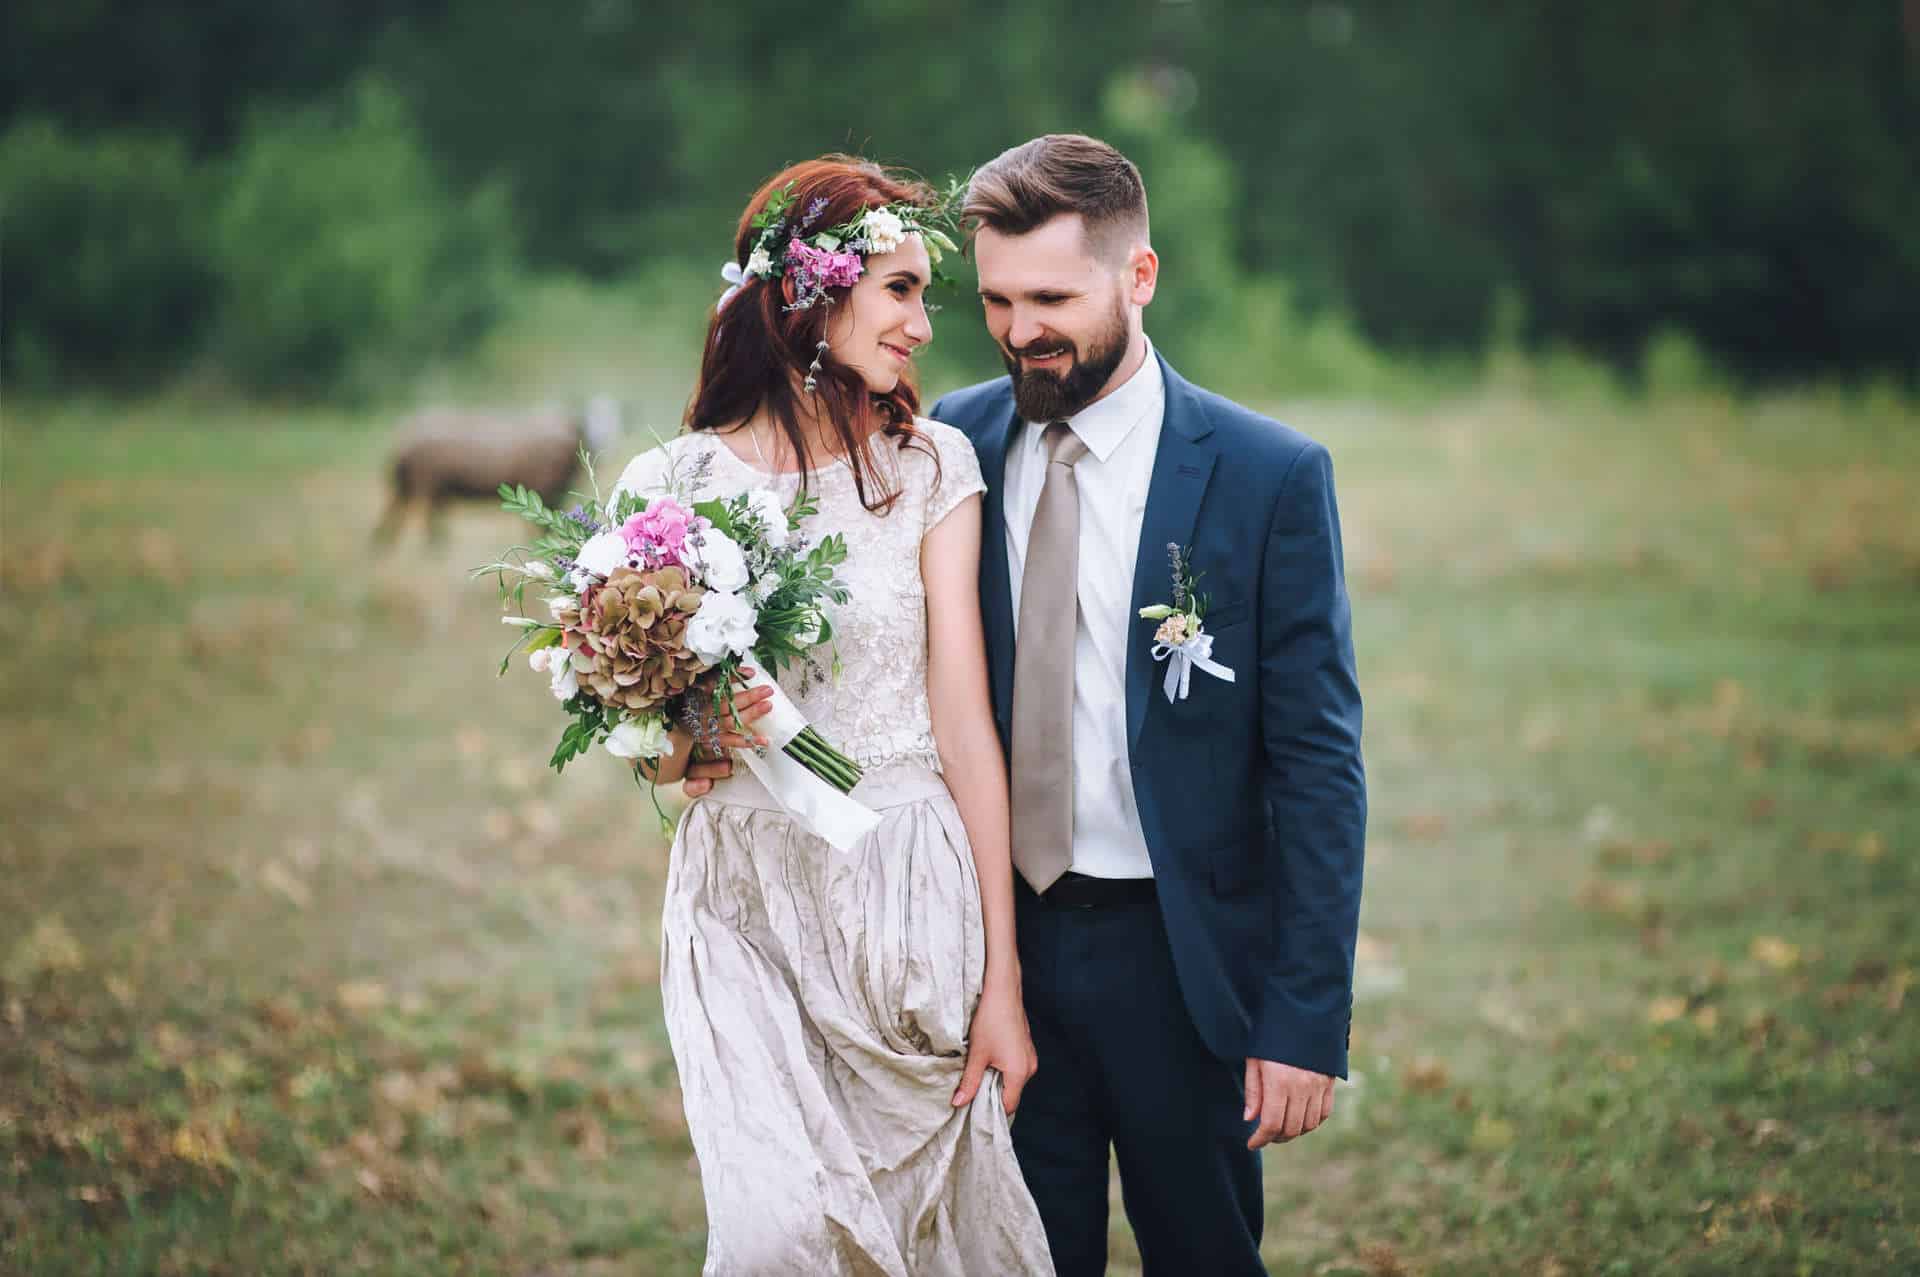 8 Incredible Eco Wedding Ideas for An Unforgettable Ceremony - The Celebrant Directory